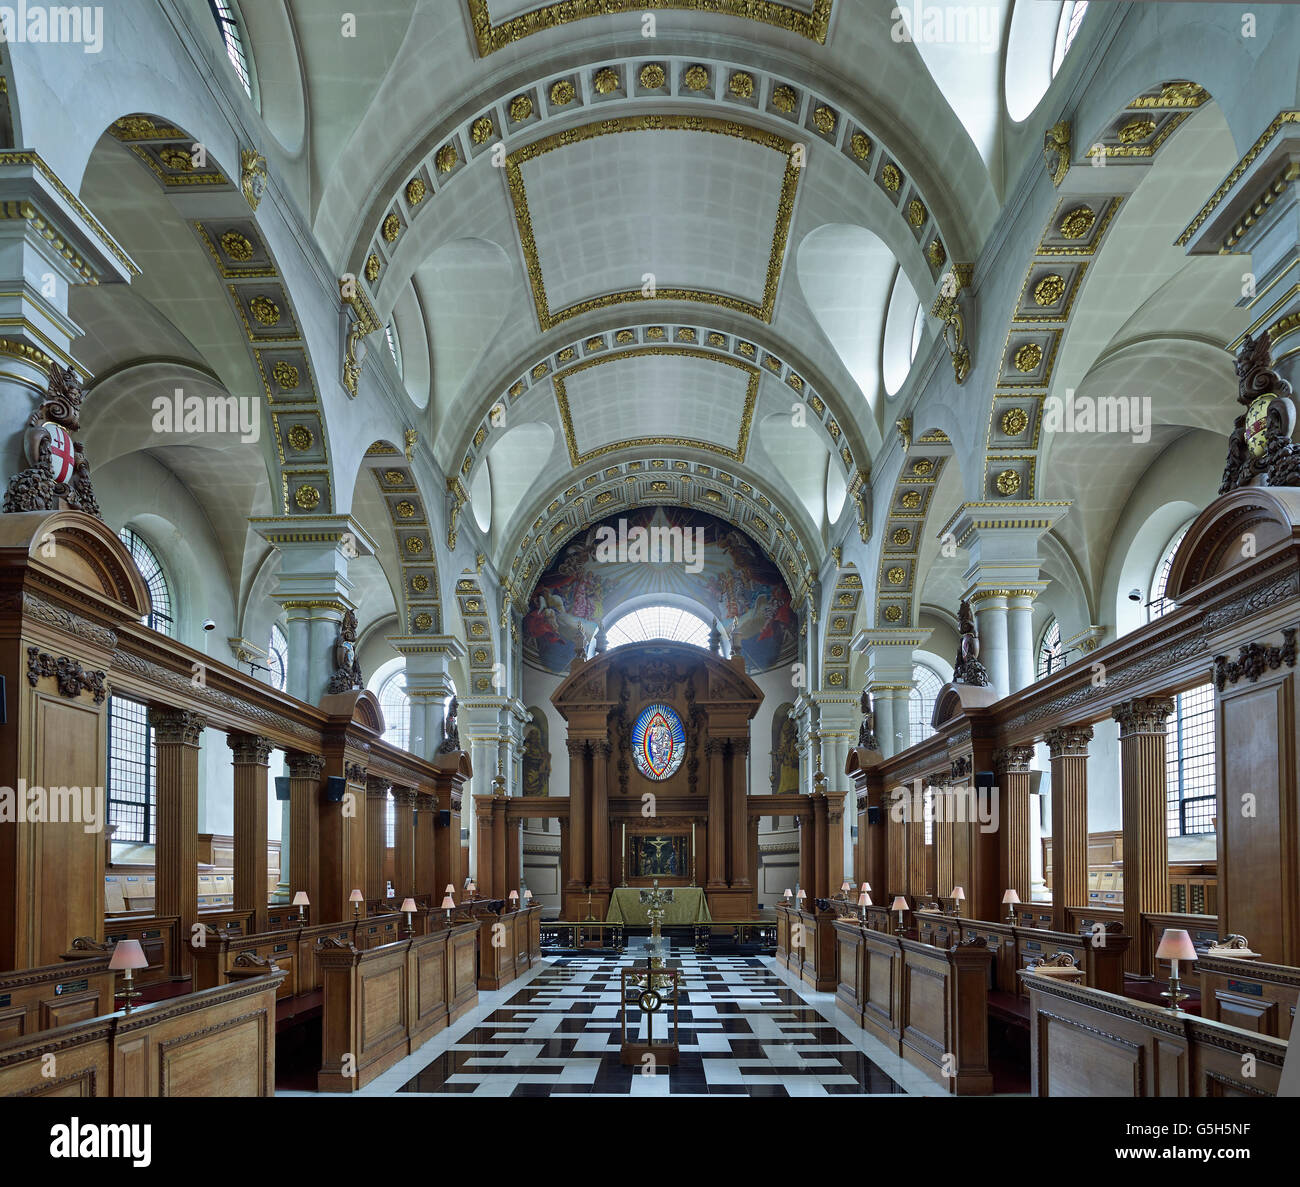 St Bride's Fleet Street, church in the City of London. The nave rebuilt after the Blitz. Stock Photo